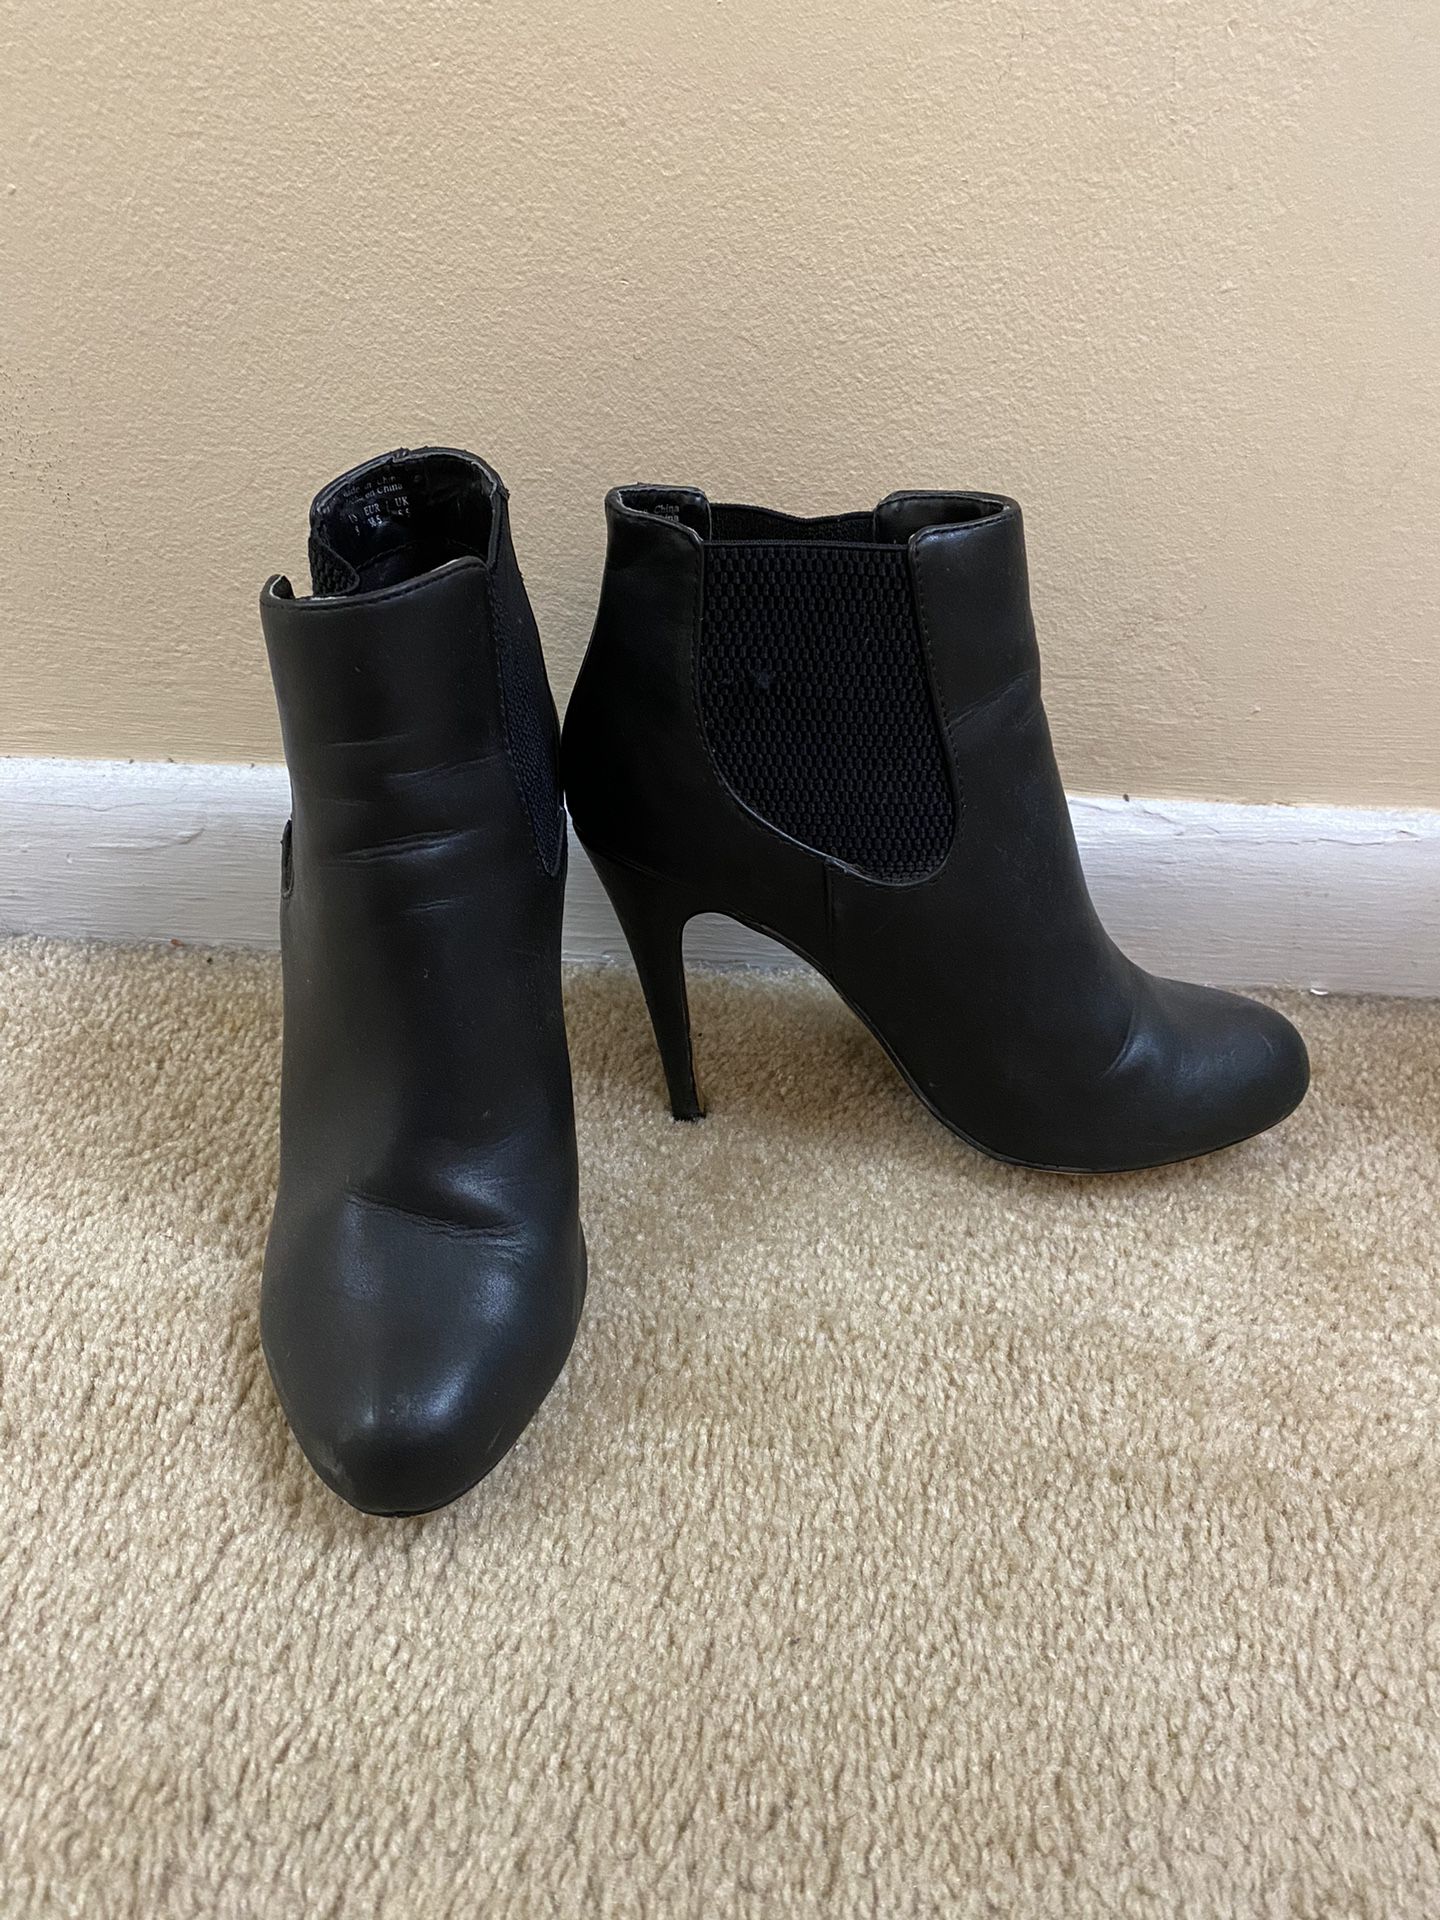 Aldo Black Leather Ankle Boots/Booties Size 8 GUC